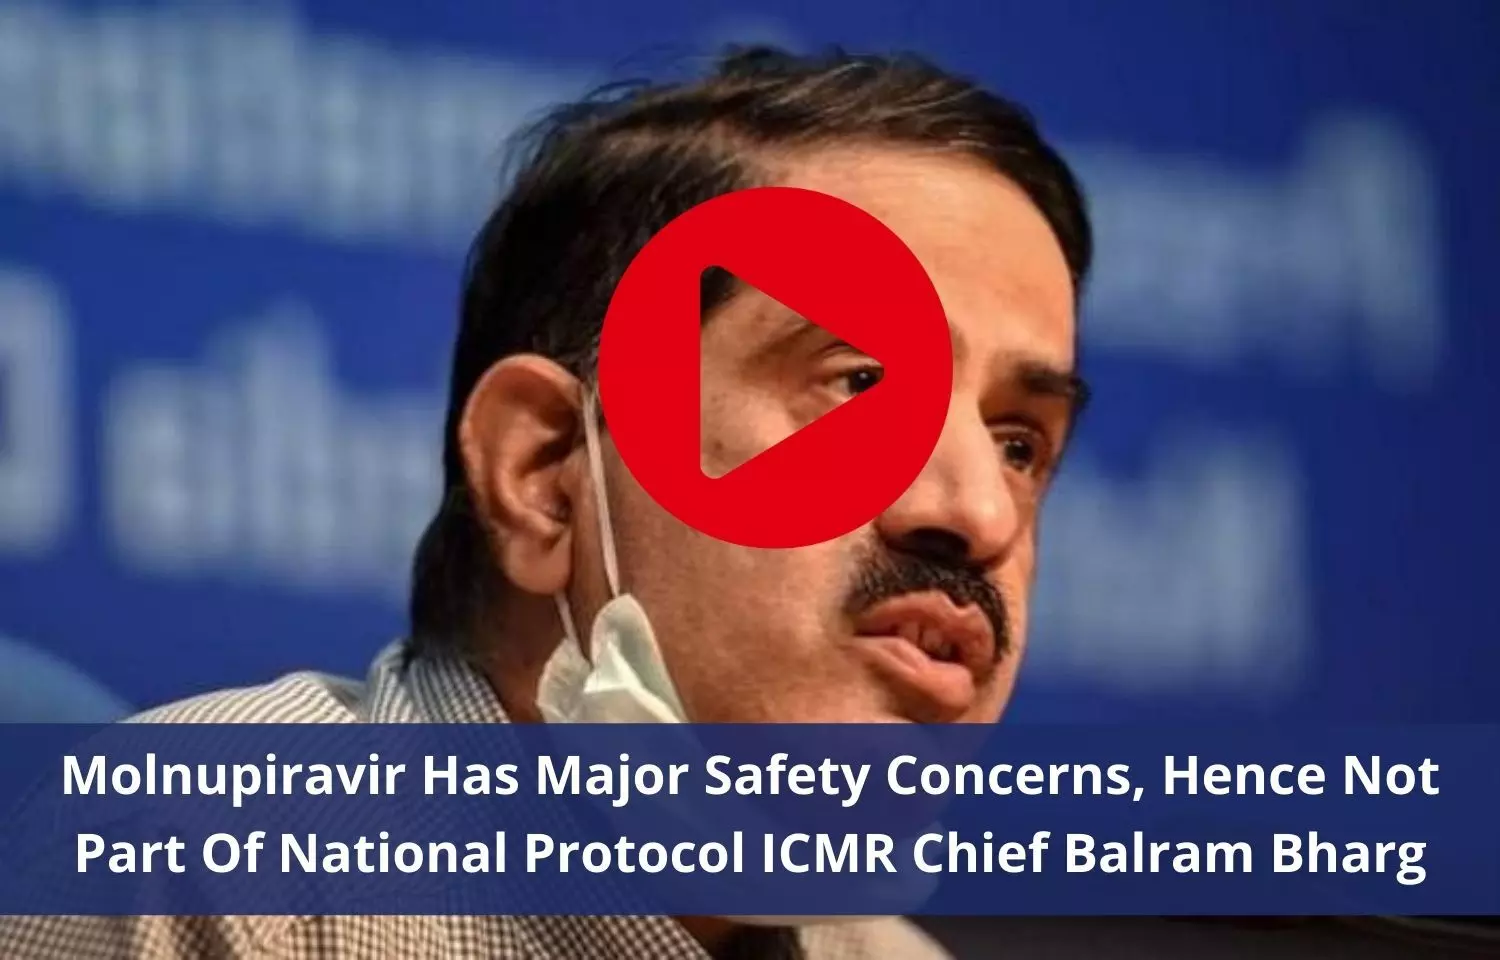 Molnupiravir  not a part of National Protocol due to safety concerns says ICMR Chief Balram Bharg